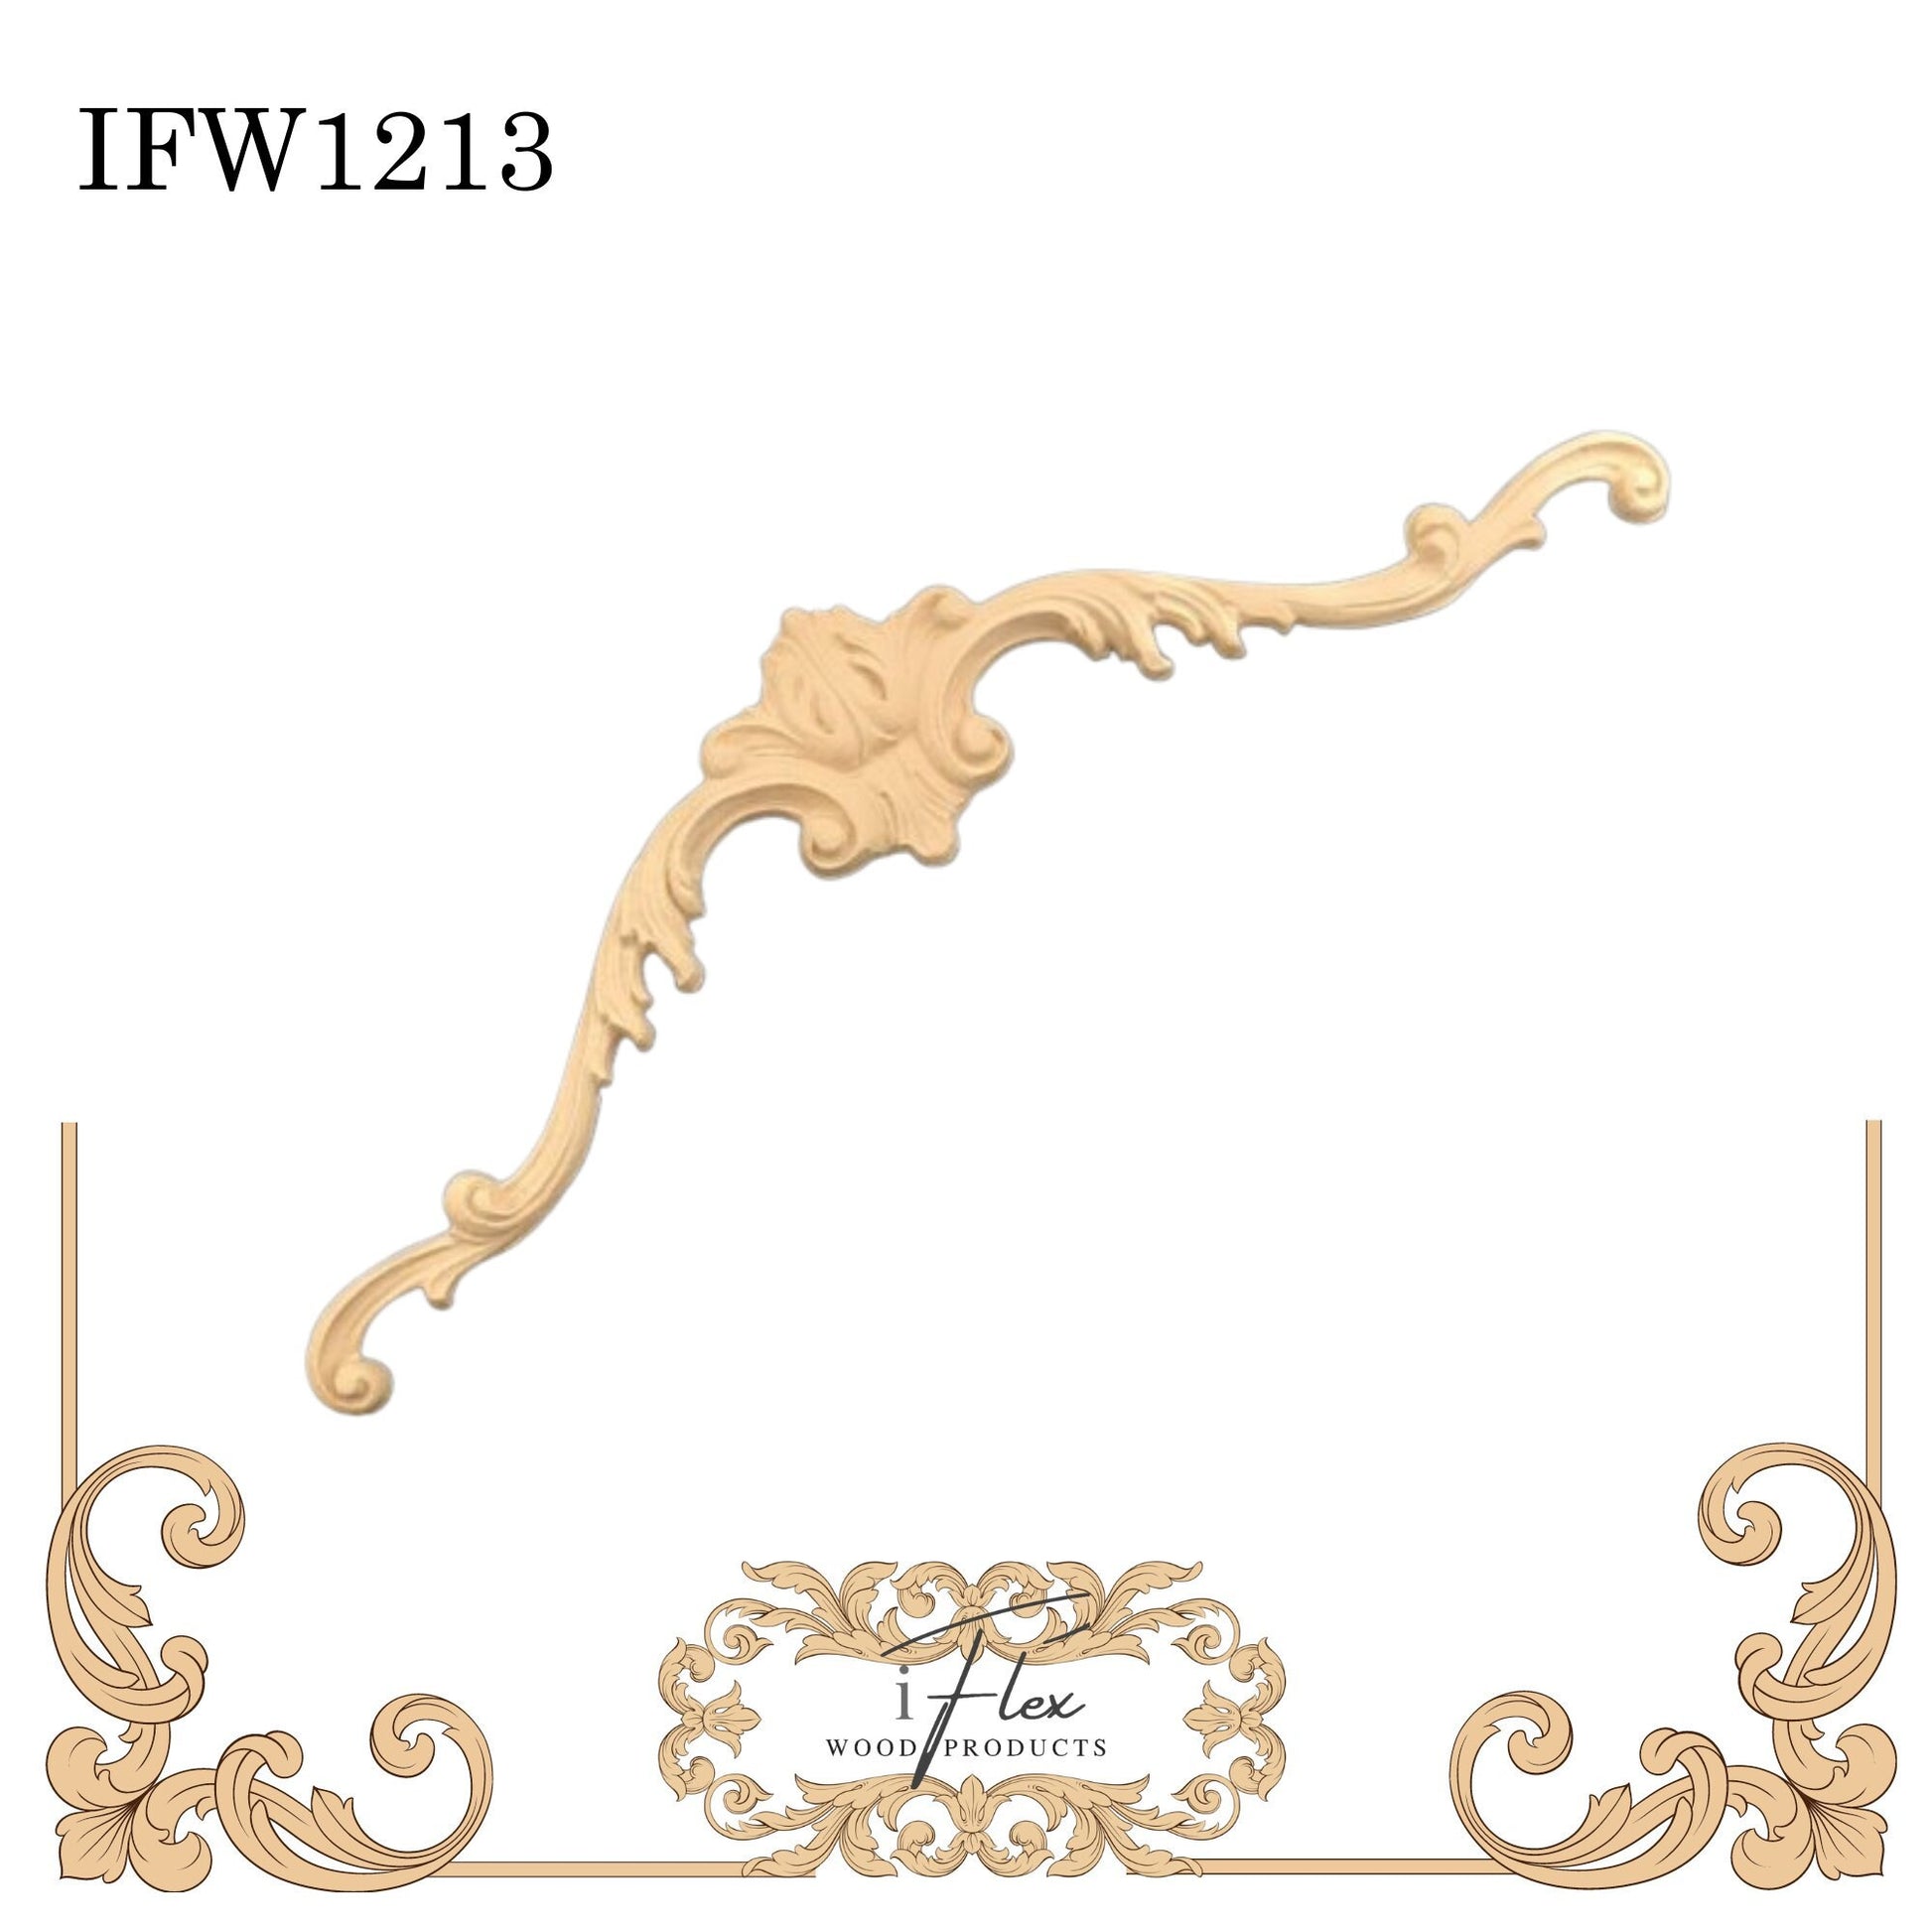 IFW 1213 iFlex Wood Products, bendable mouldings, flexible, wooden appliques, pediment